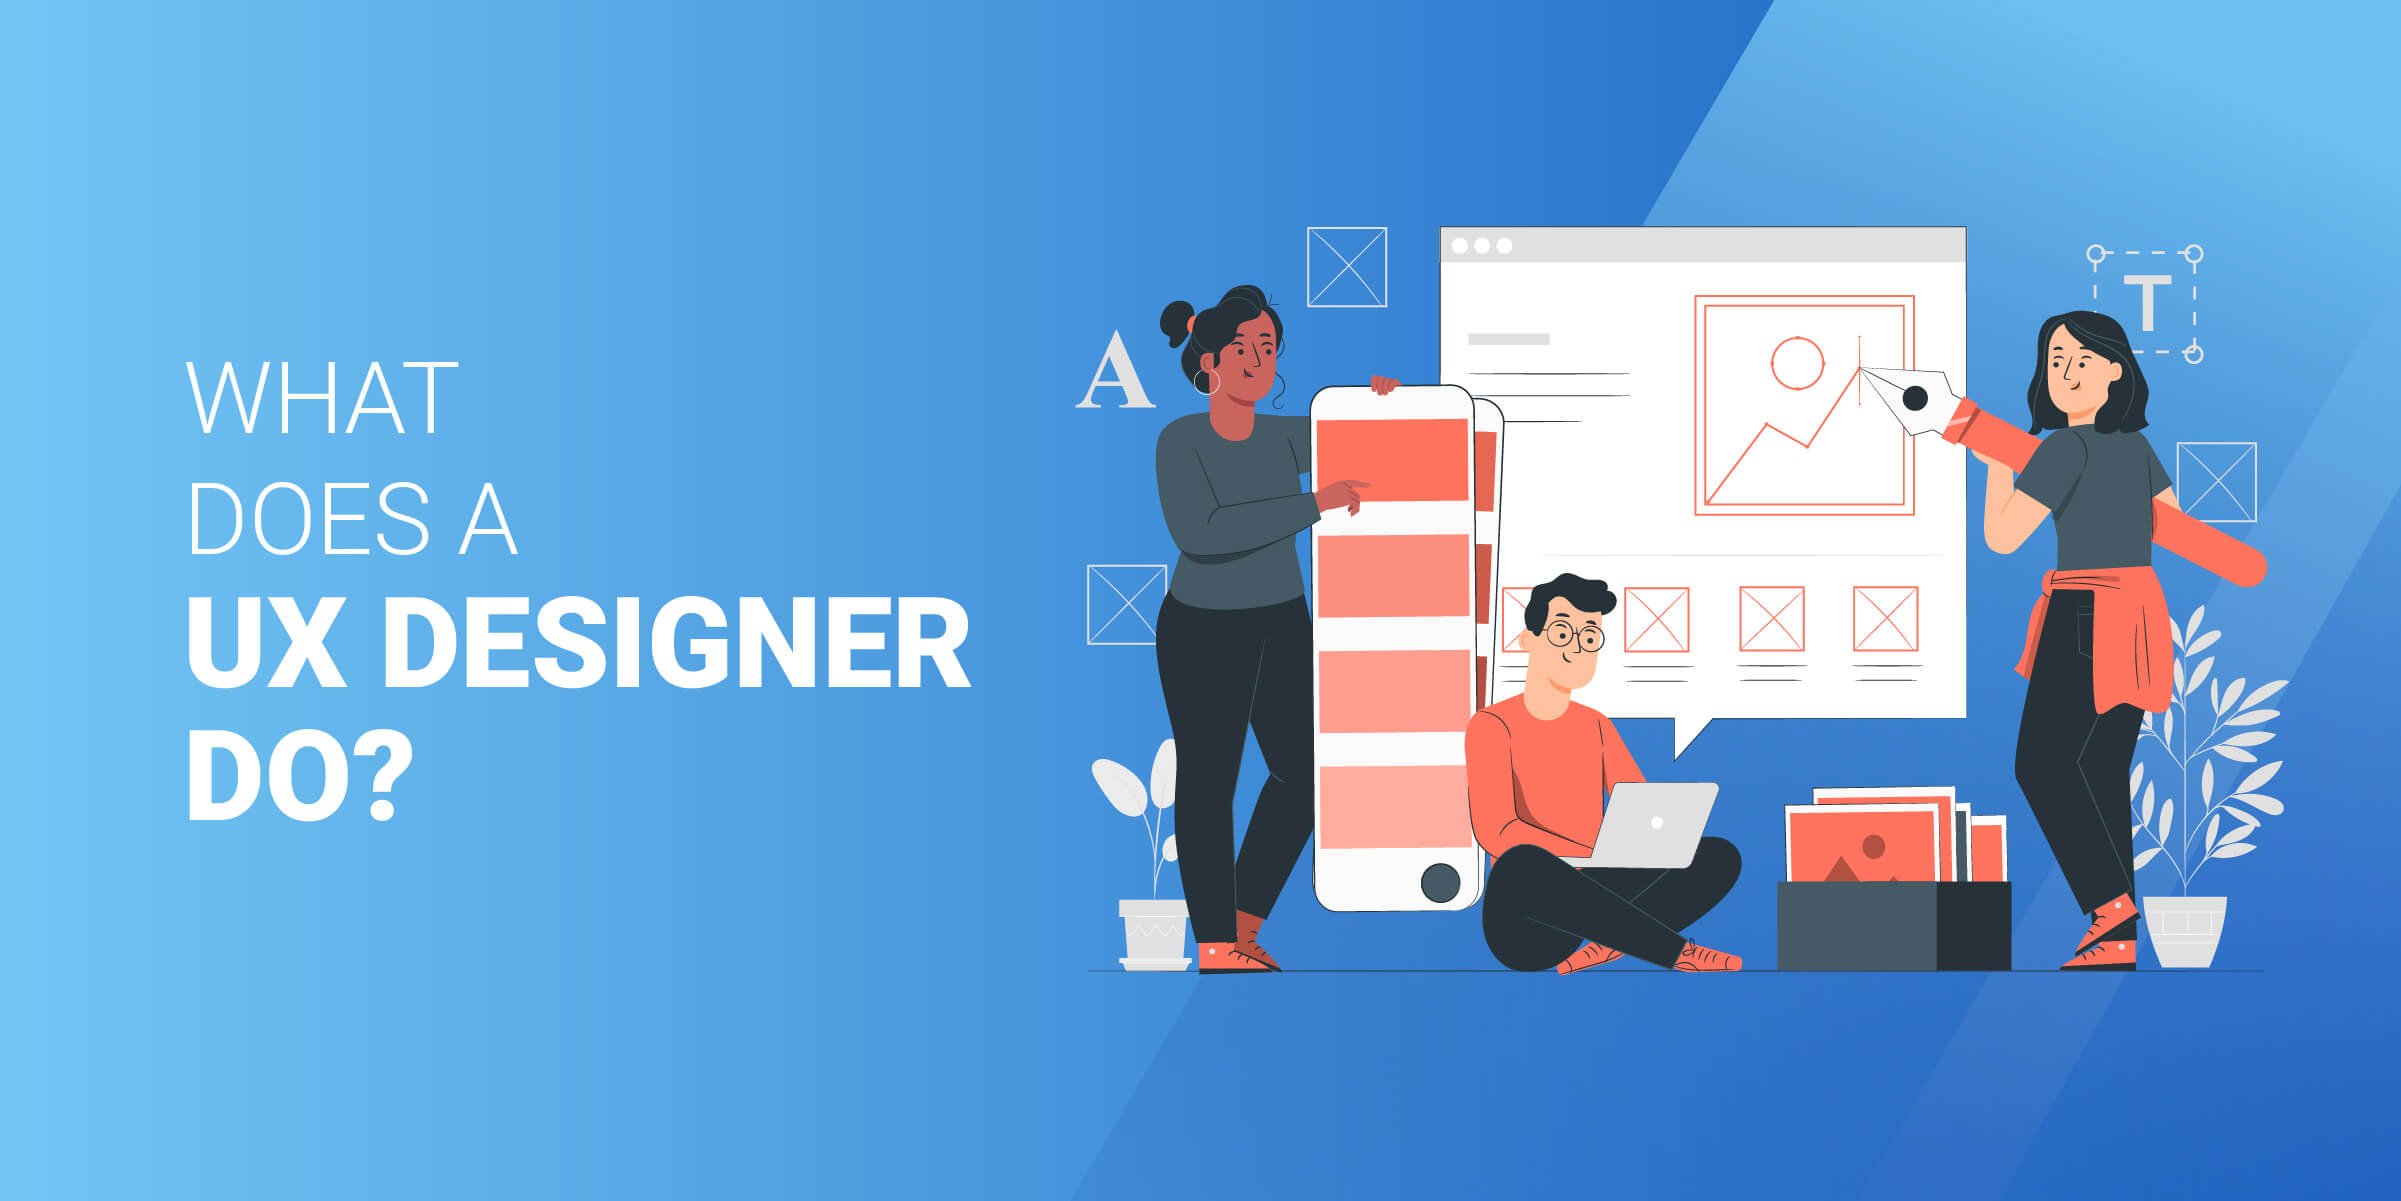 What Does a UX Designer Do